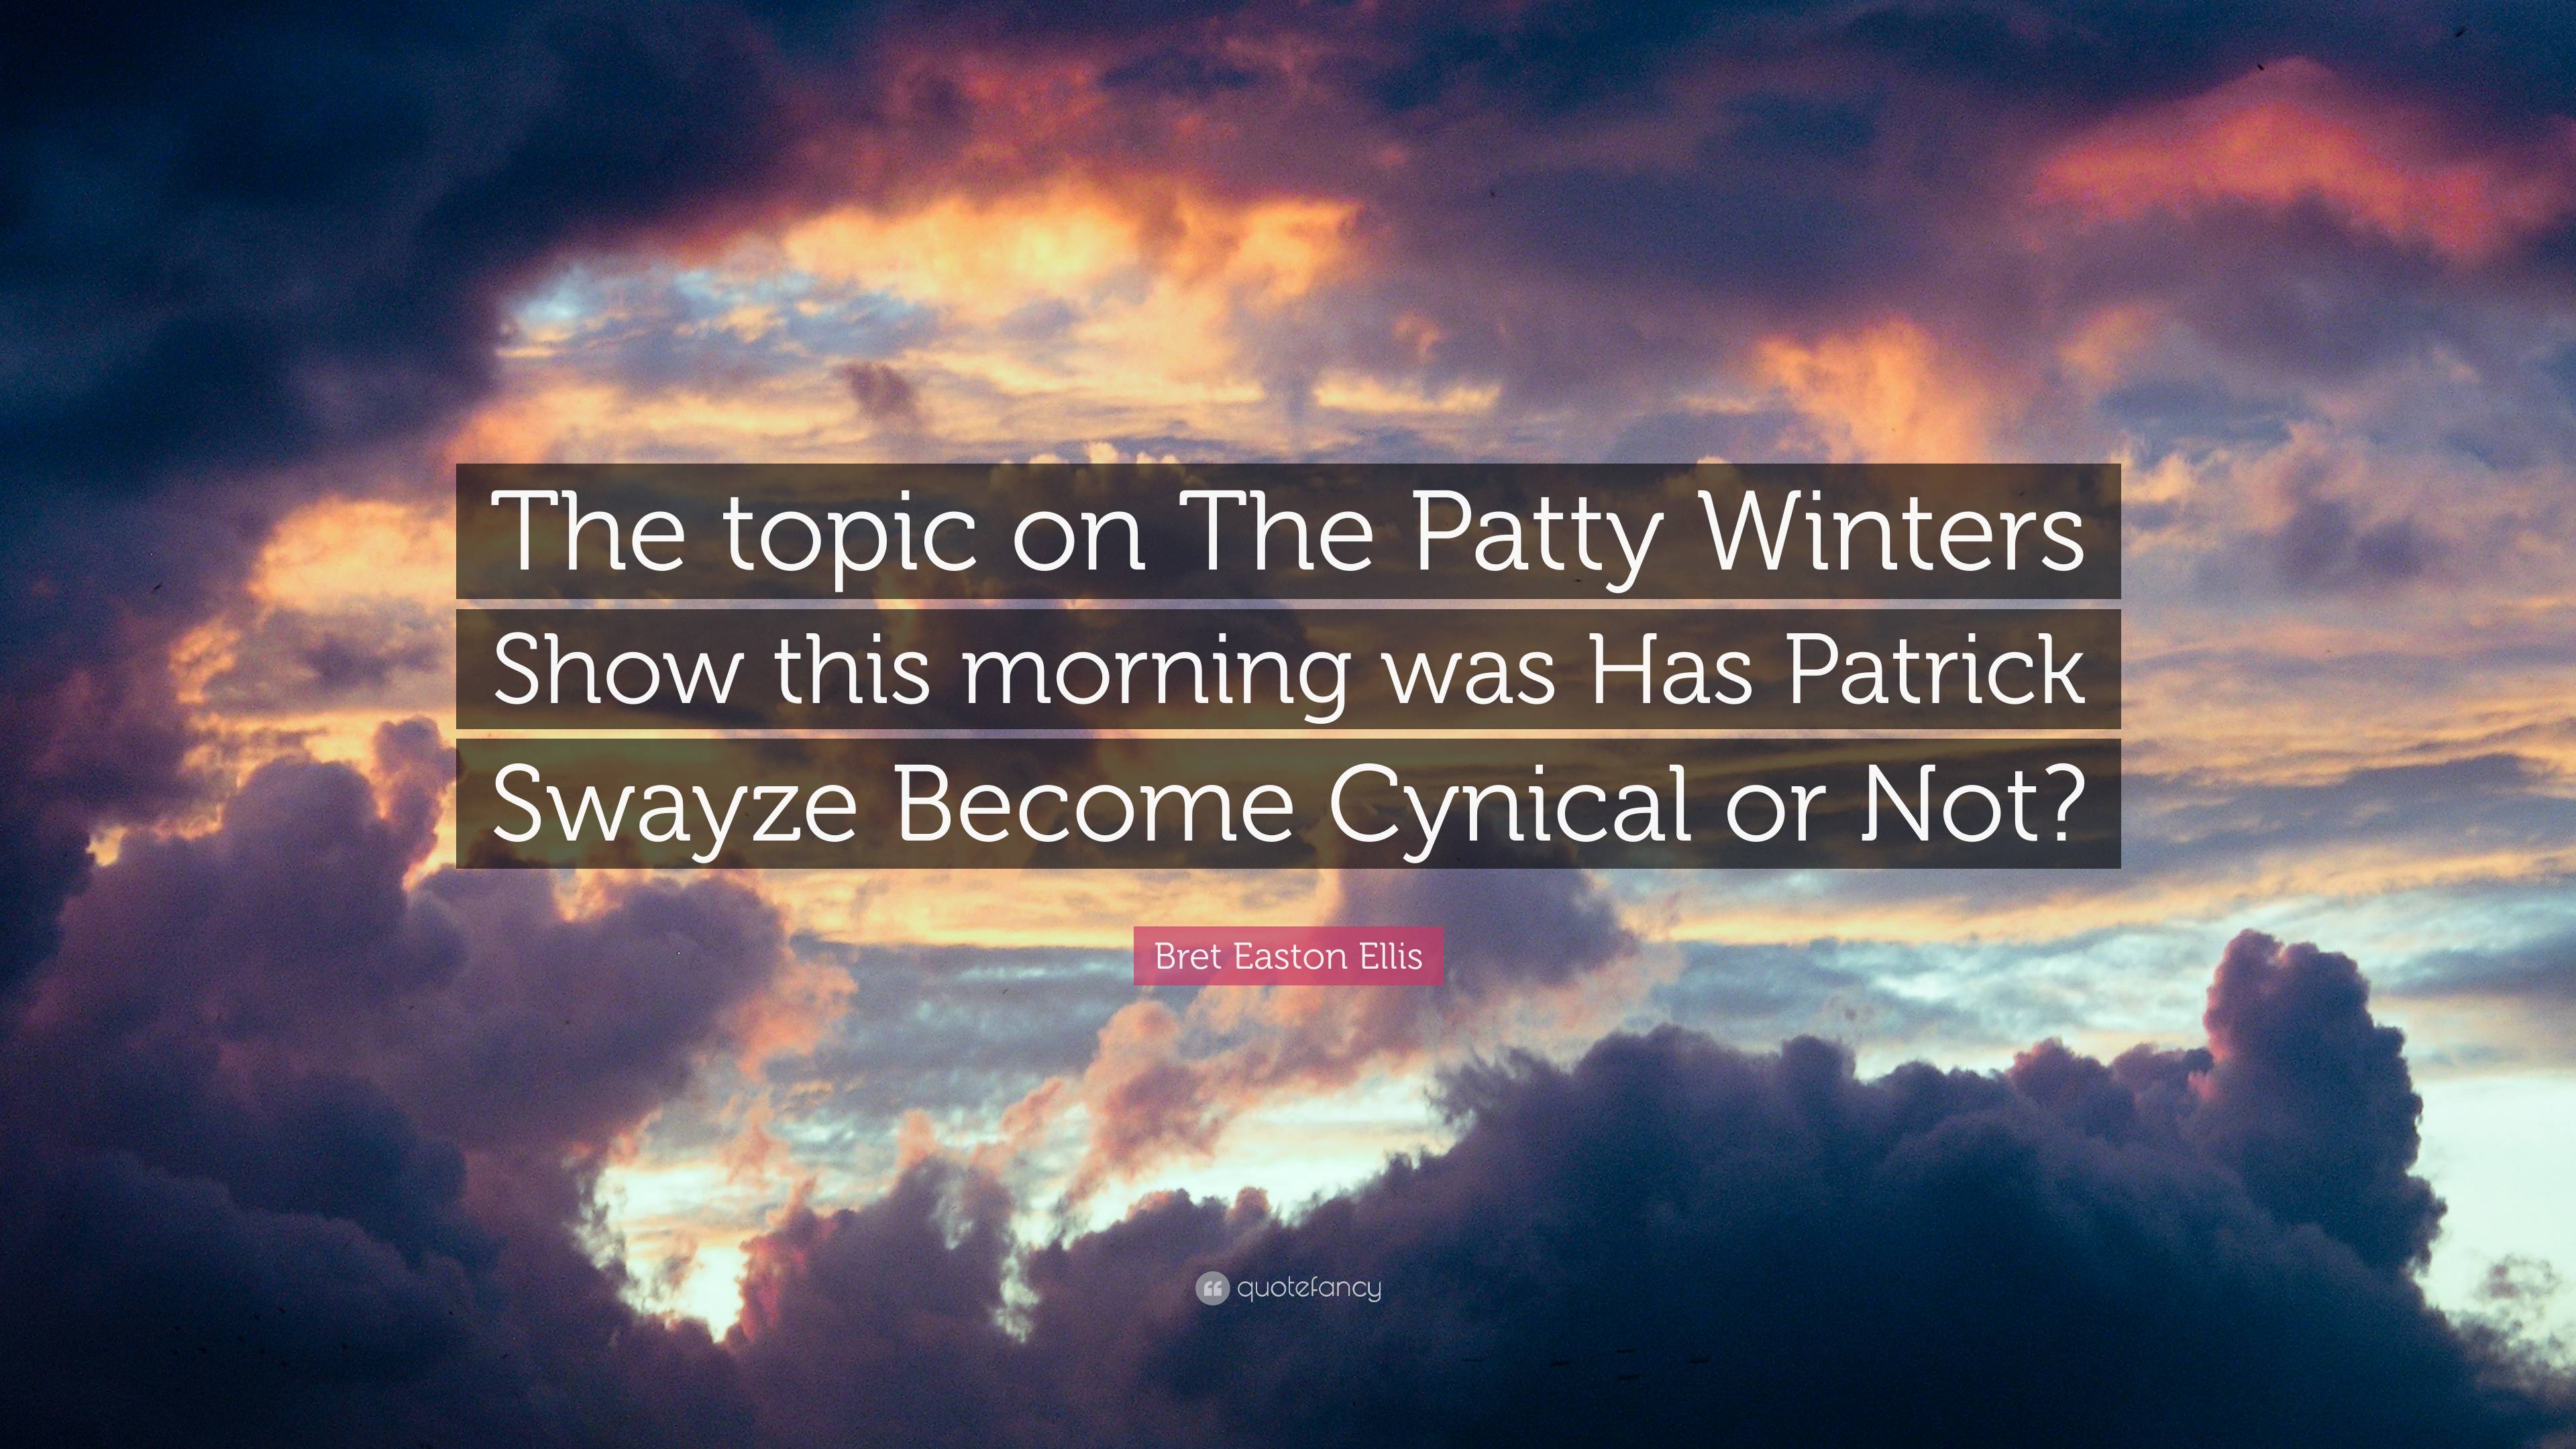 Bret Easton Ellis Quote: “The topic on The Patty Winters Show this ...